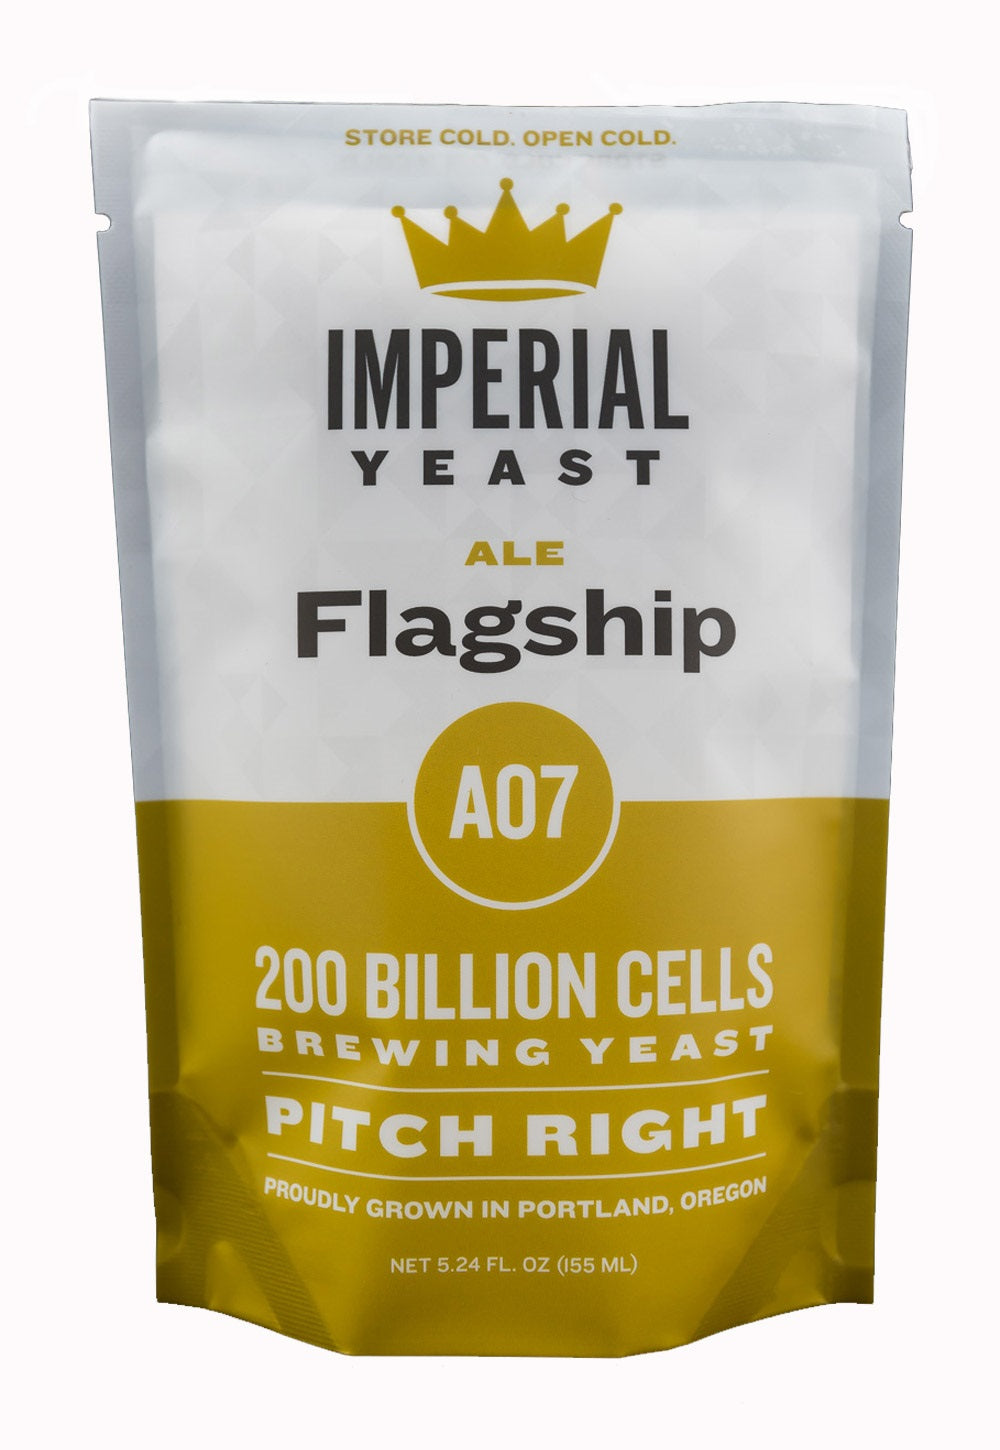 Flagship Yeast A07